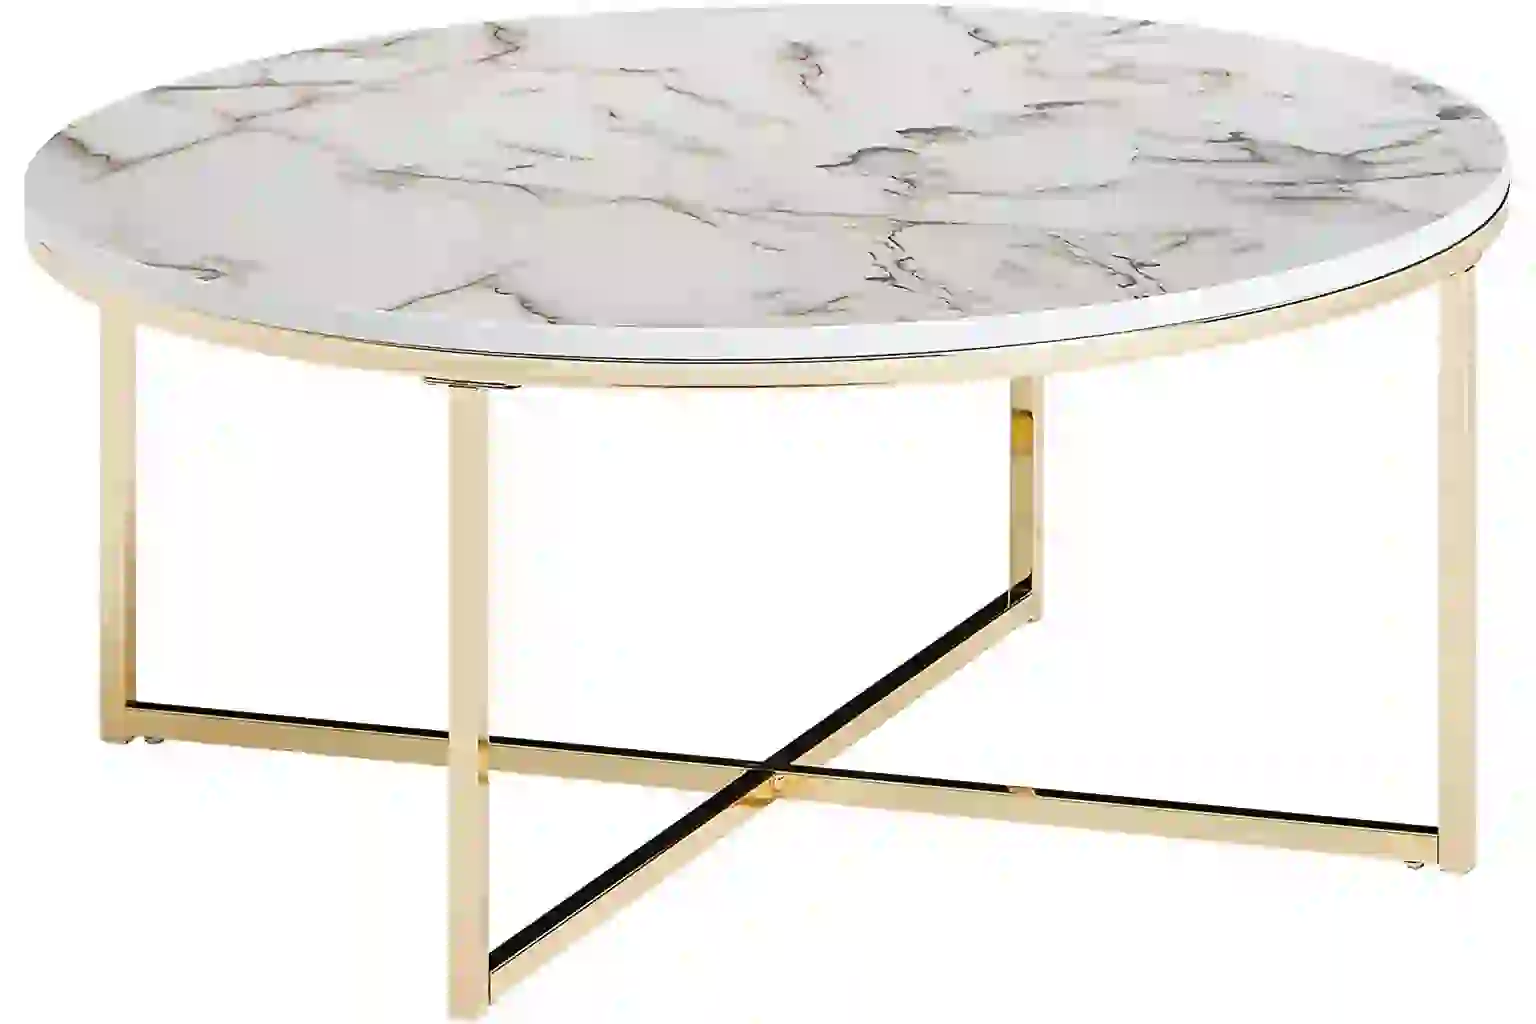 You are currently viewing Comment nettoyer une table en marbre